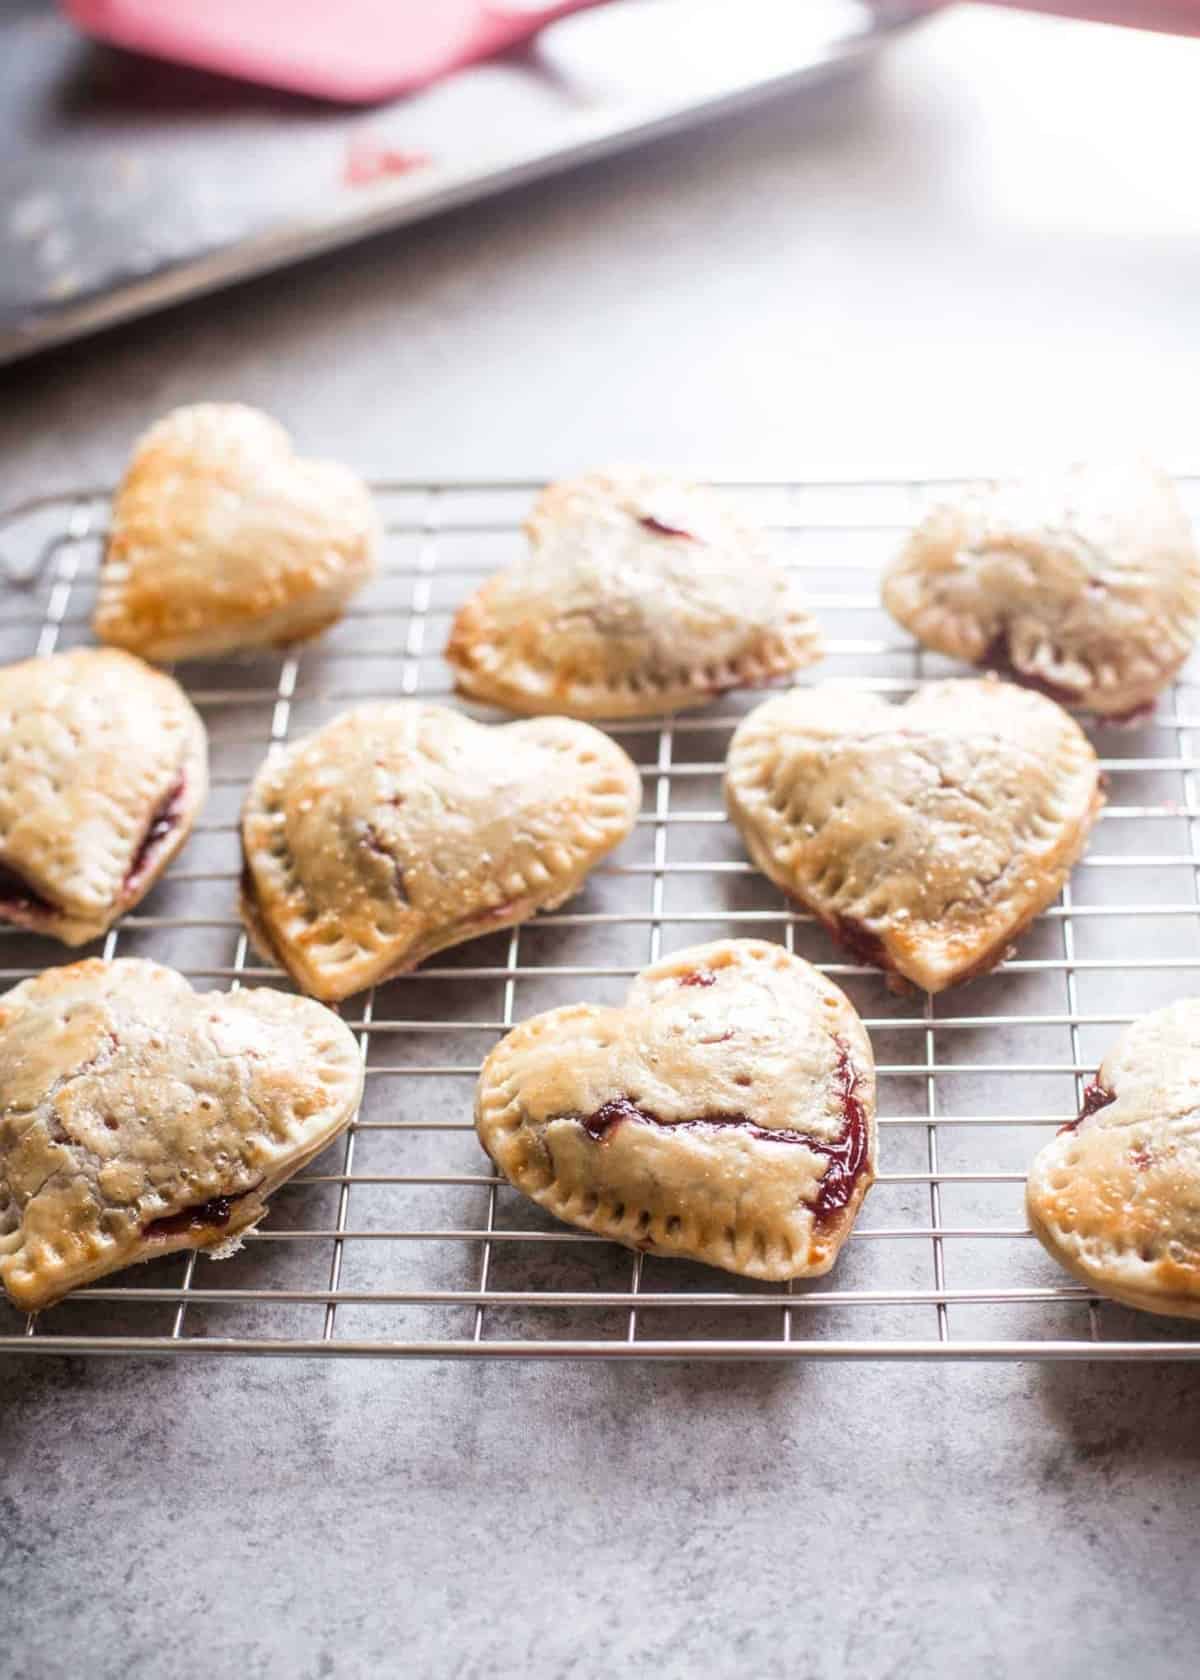 Strawberry Nutella Hand Pies on a cooling rack